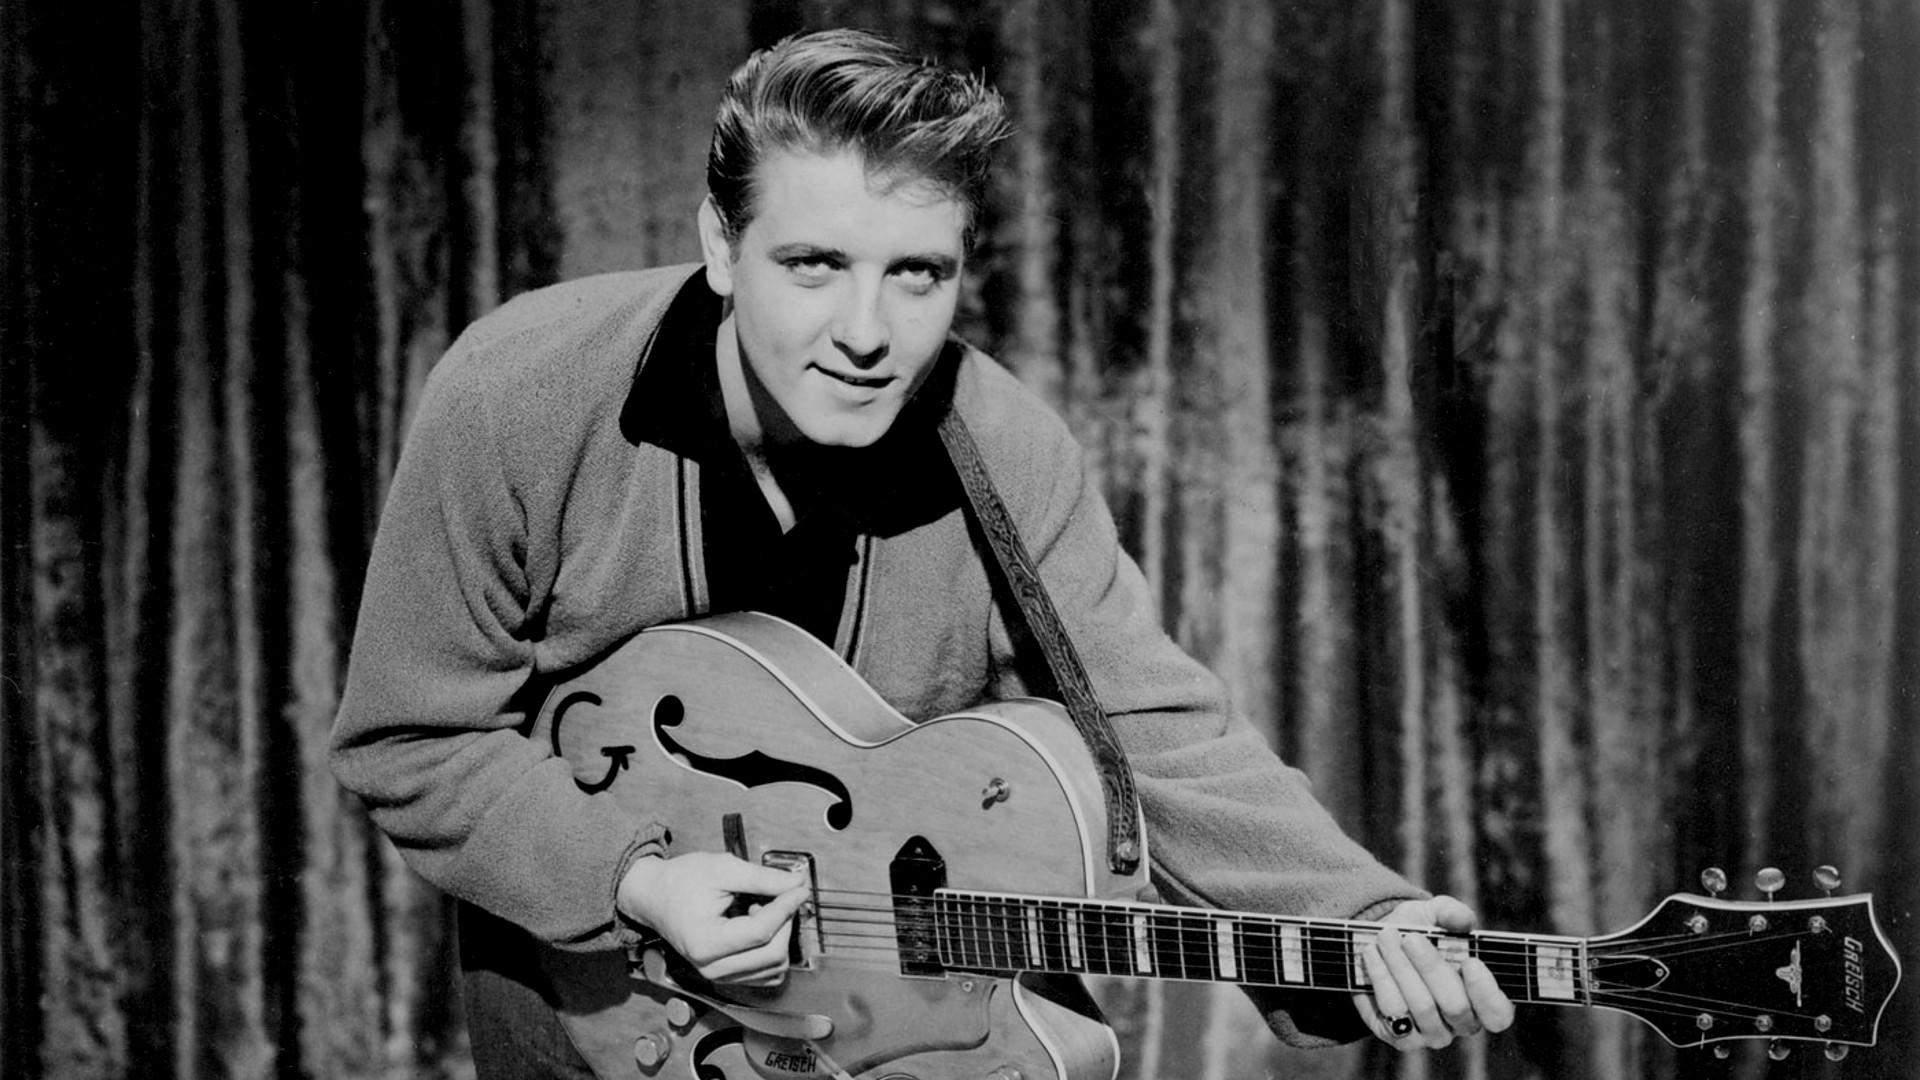 Happy Birthday to Eddie Cochran, who would have turned 77 today! 